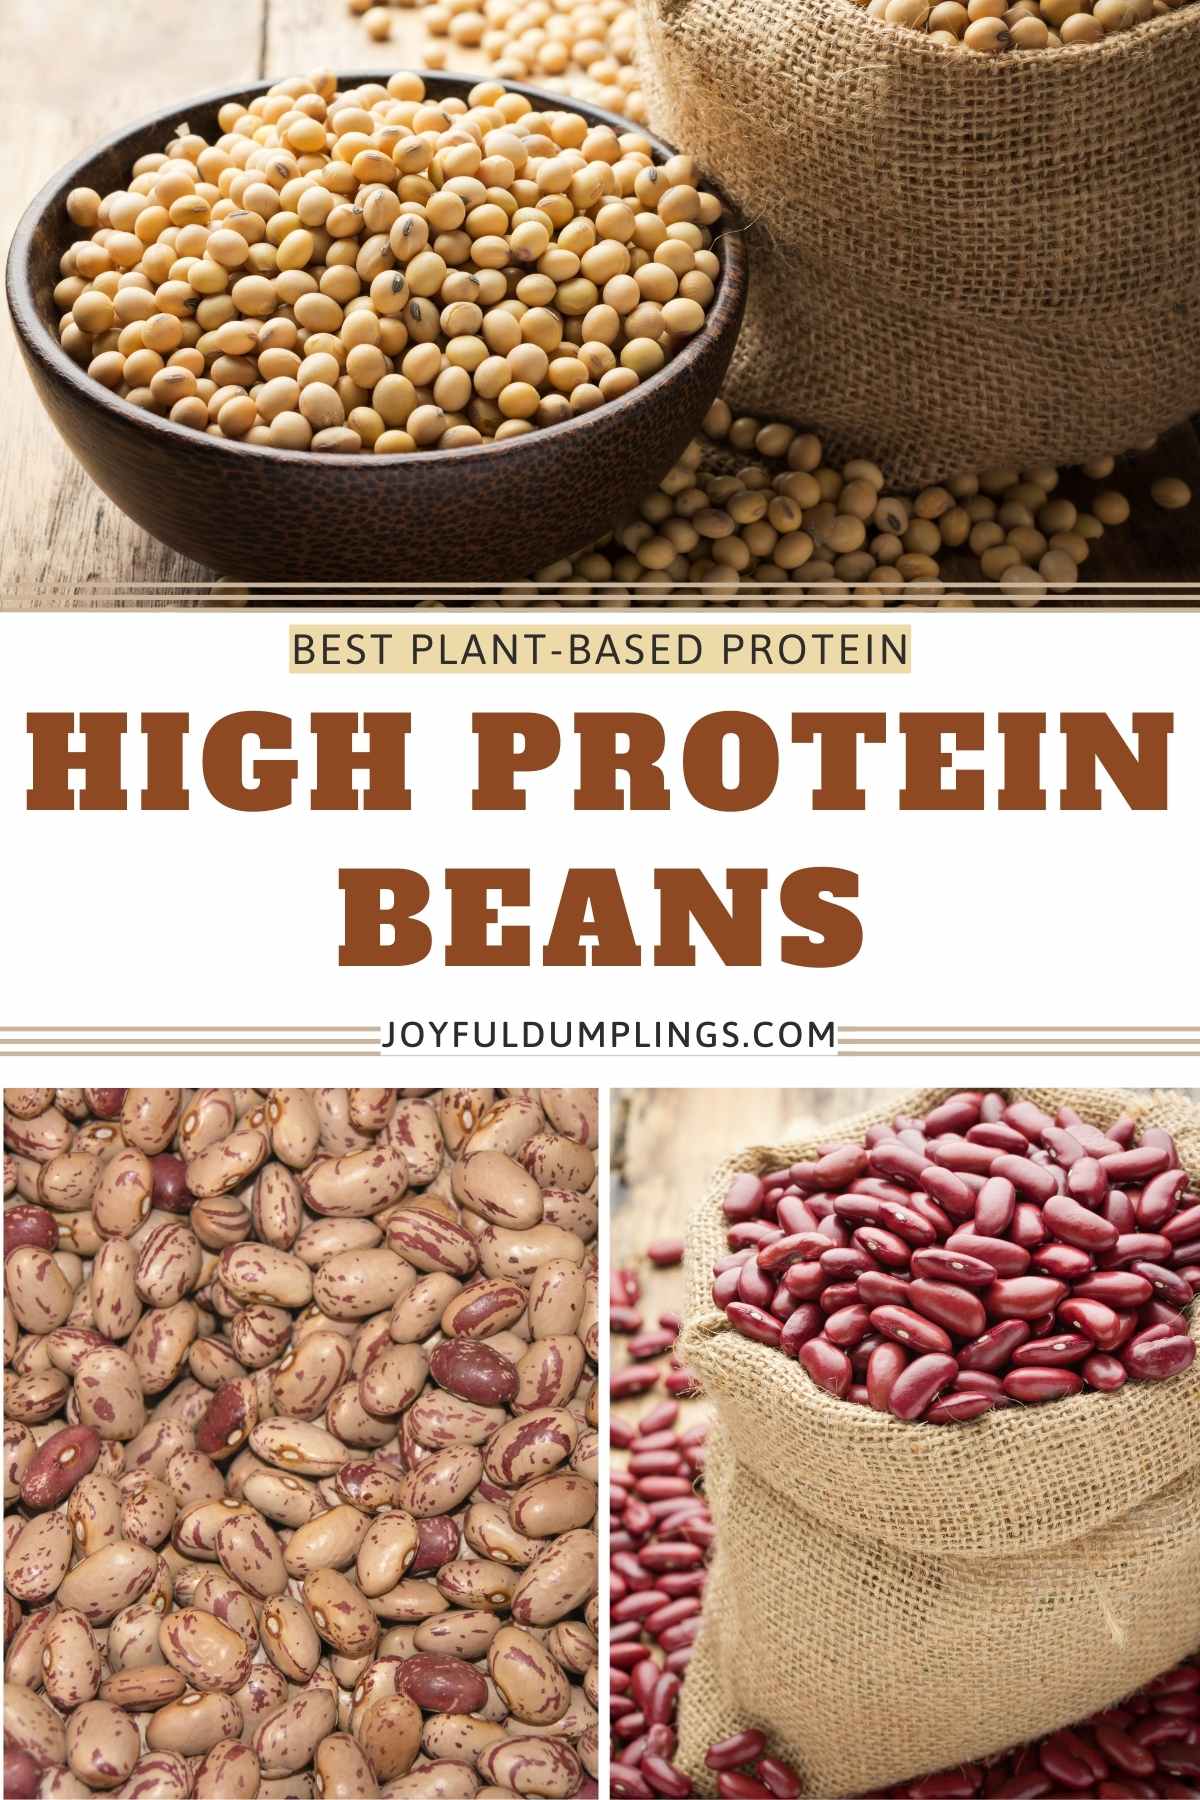 12 High Protein Beans and Legumes